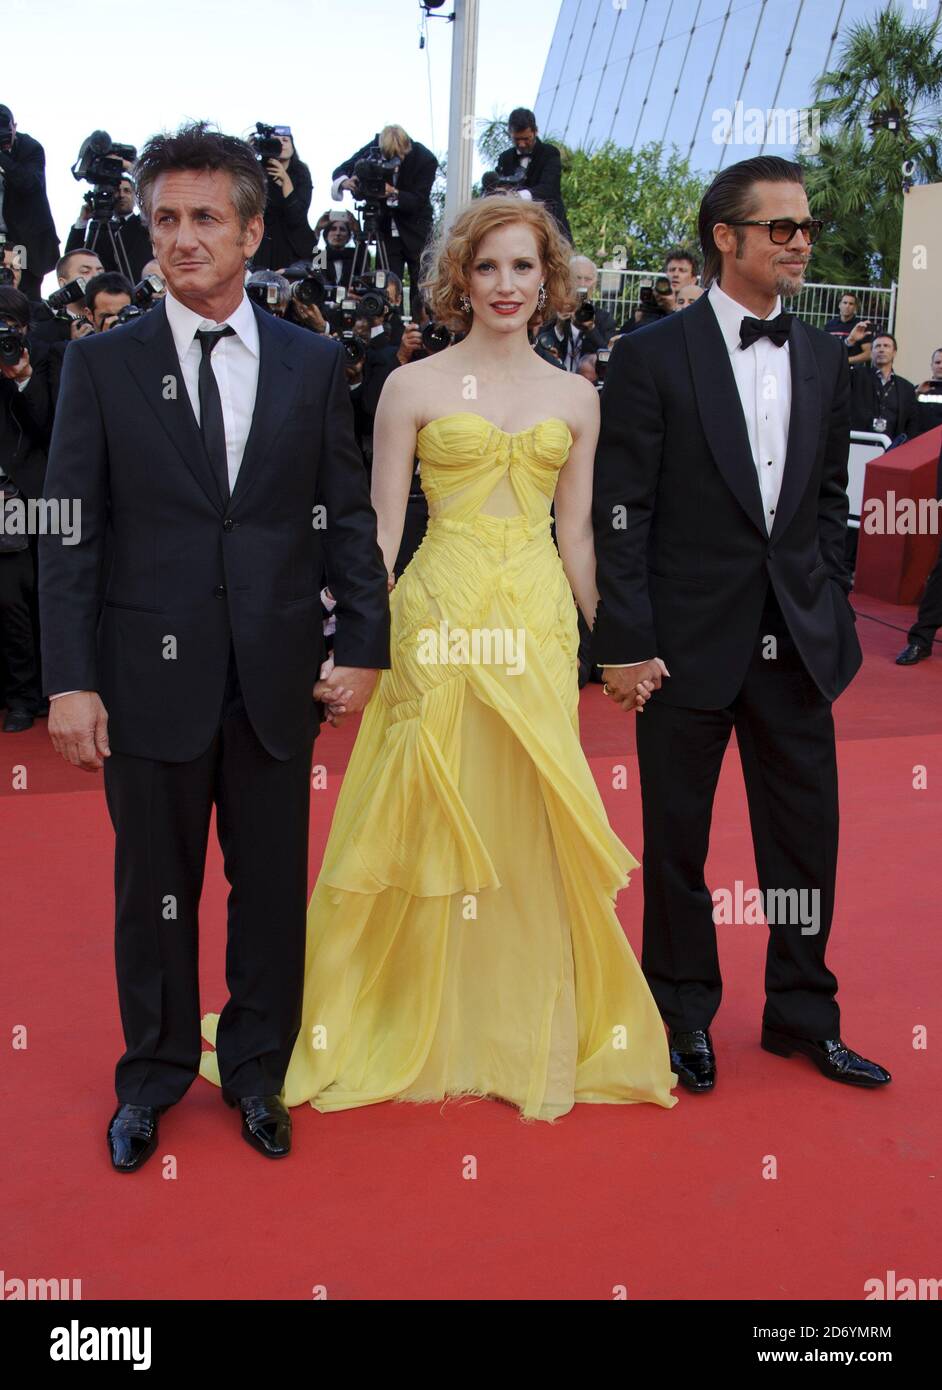 Brad Pitt, Jessica Chastain and Sean Penn arrive at the premiere of Tree of  Life during the 64th Cannes International Film Festival, at the Palais des  Festivales in Cannes, France Stock Photo -